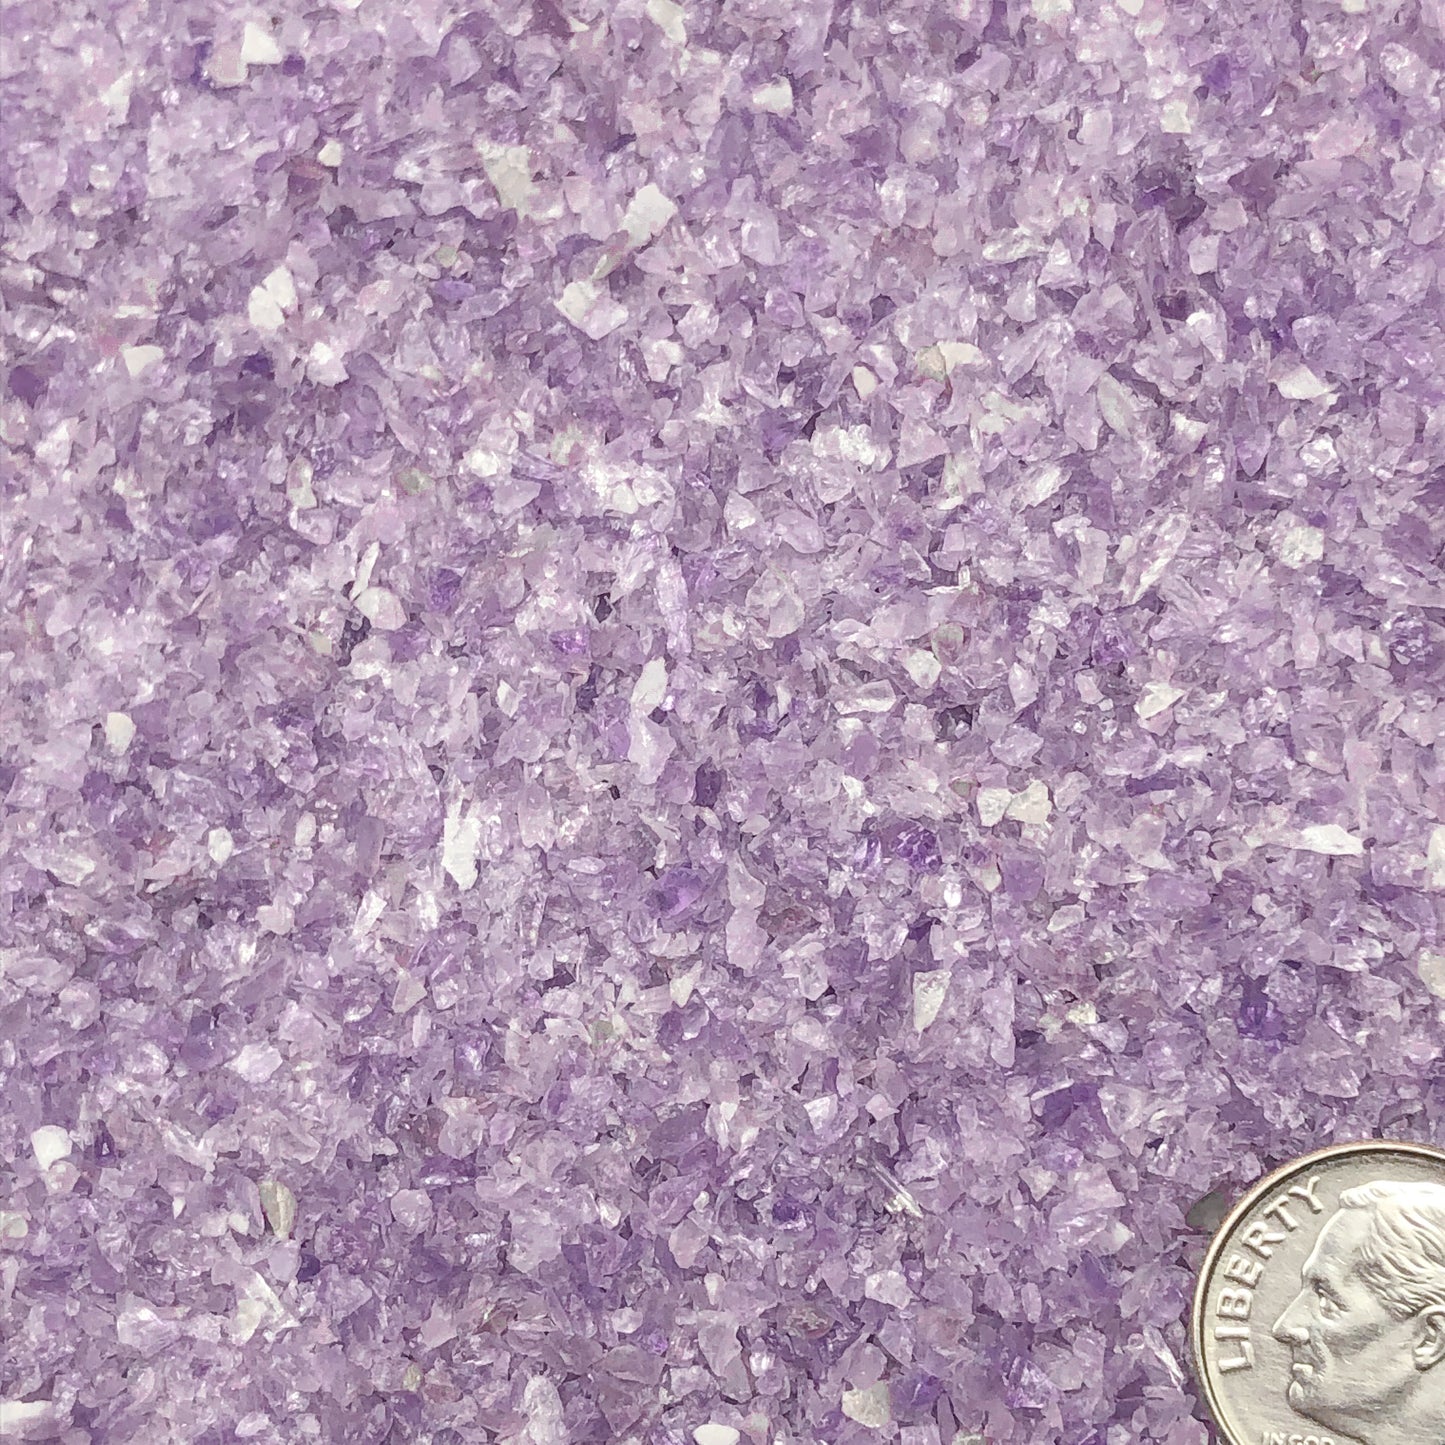 Crushed Purple Amethyst (Grade A) from Namibia, Medium Crush, Sand Size, 2mm - 0.25mm